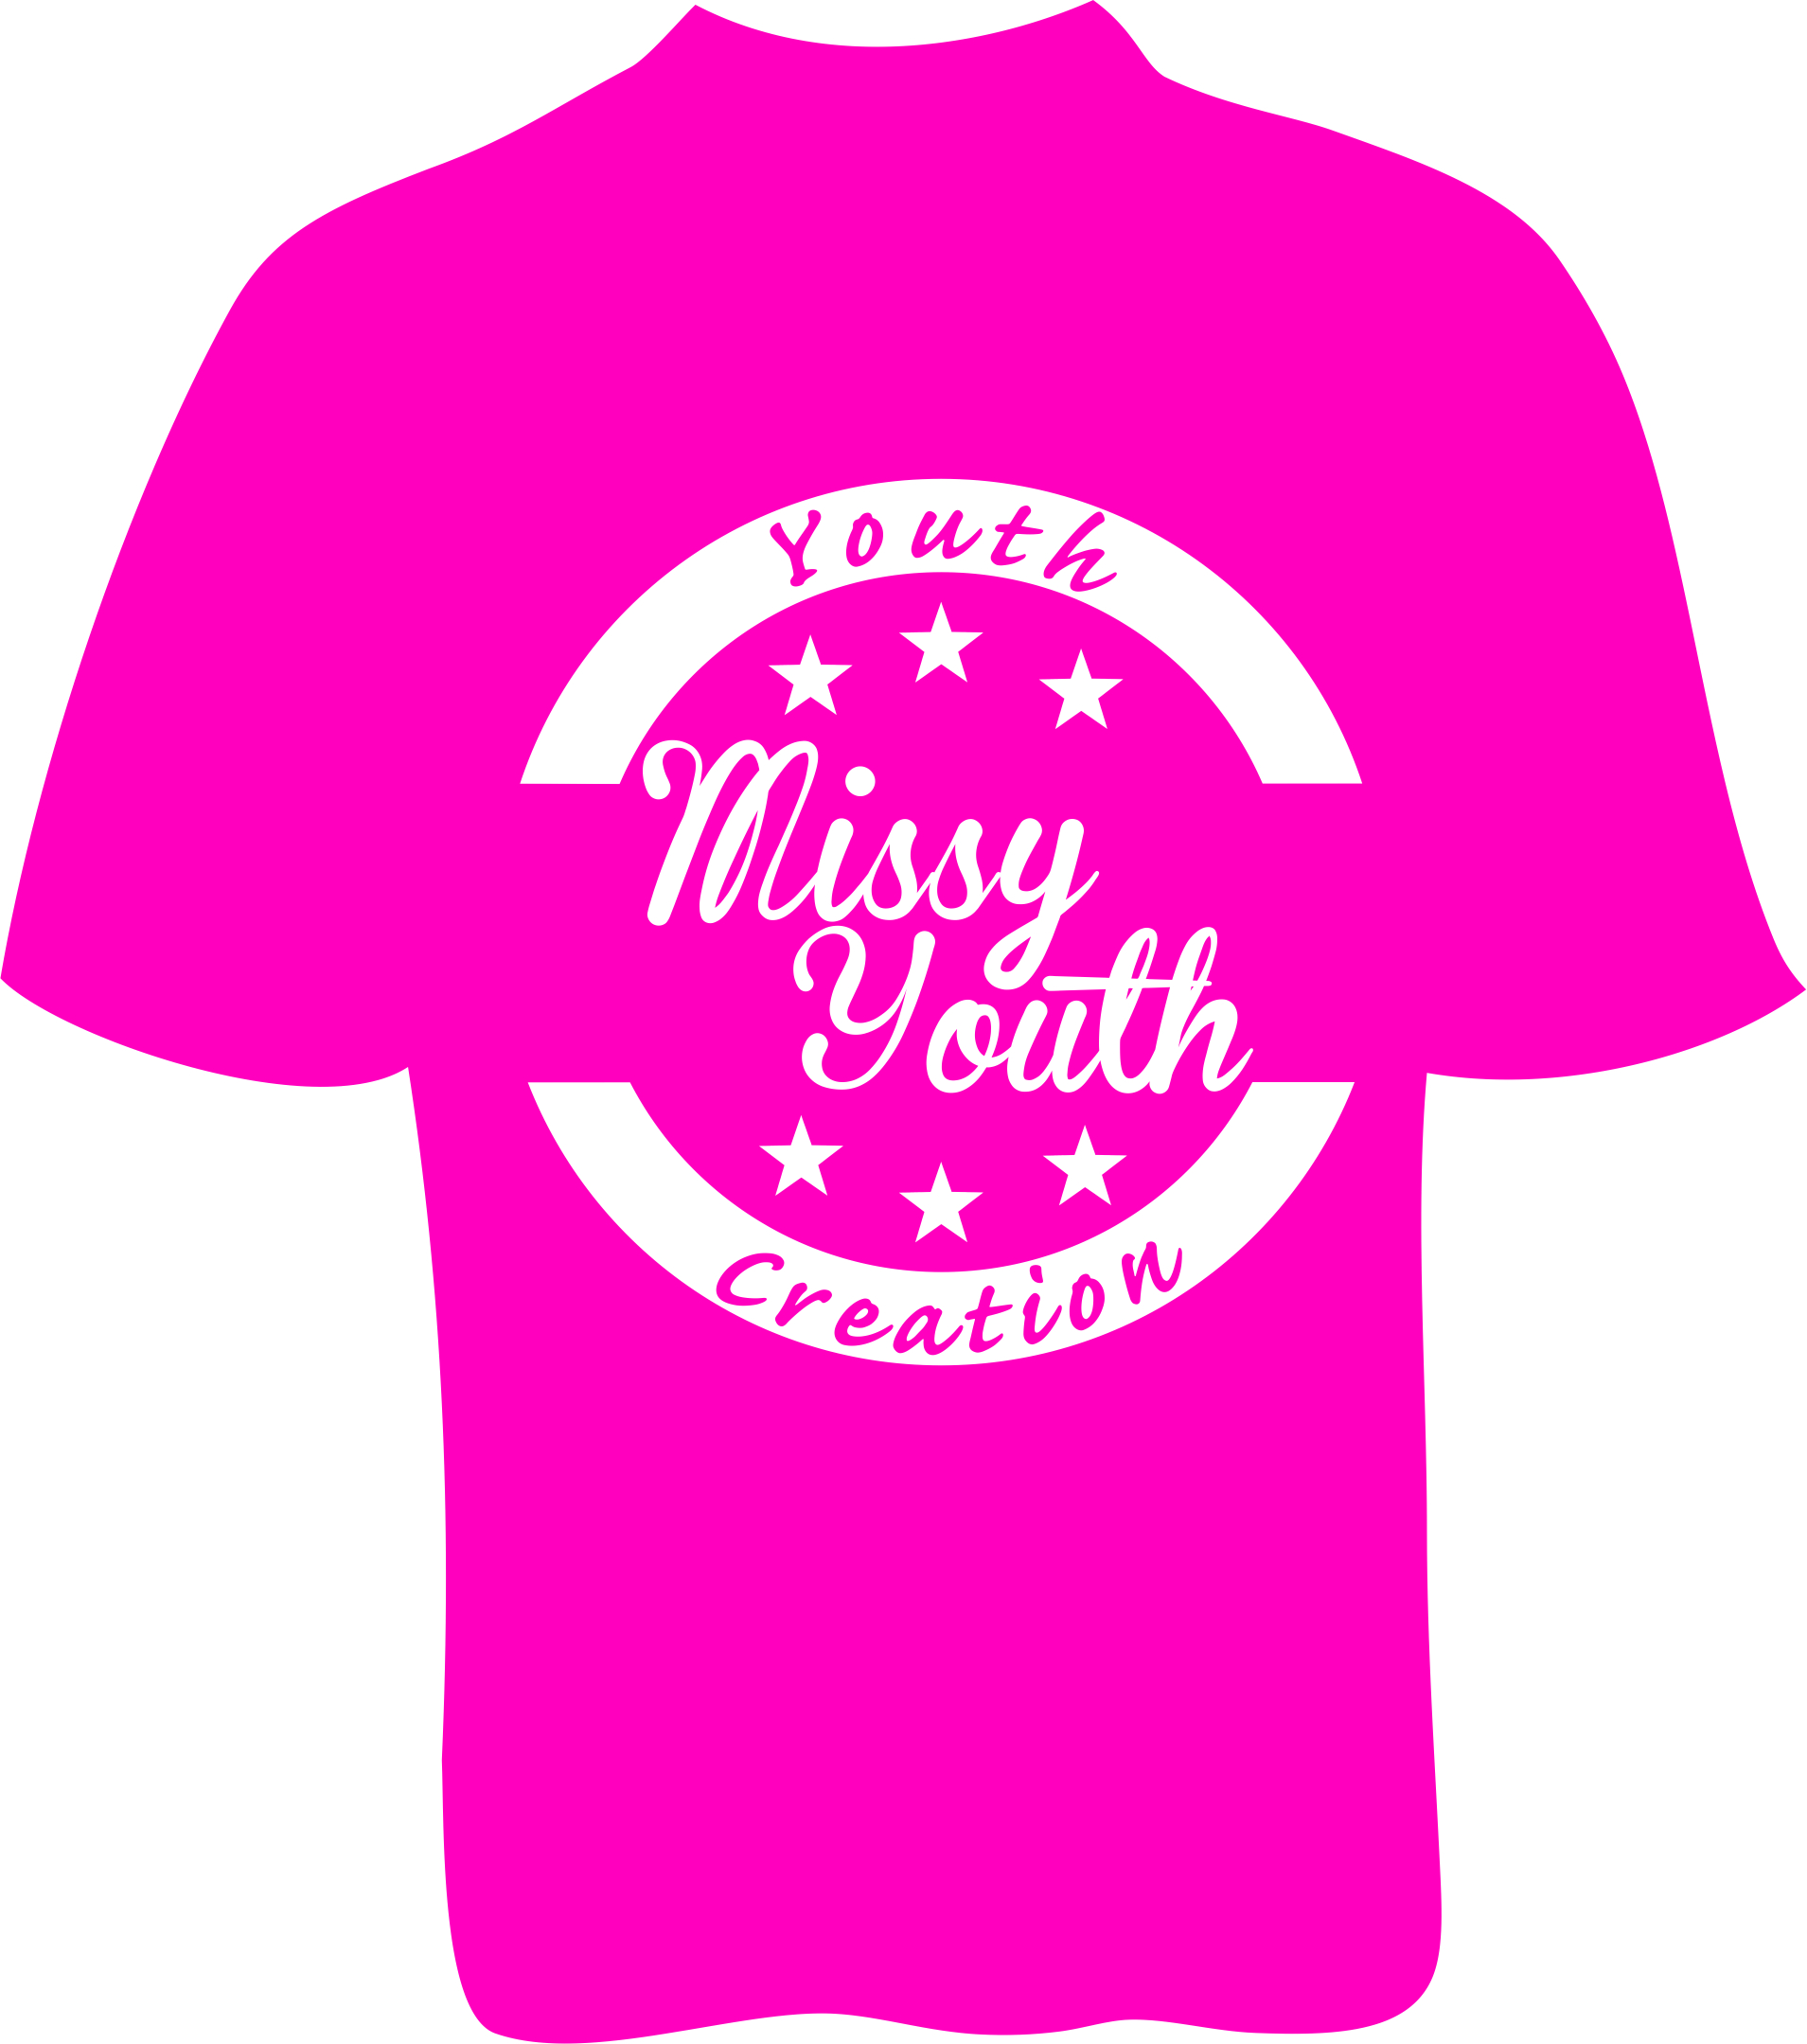 Youth Creation Children's Competition Team Tee Shirt